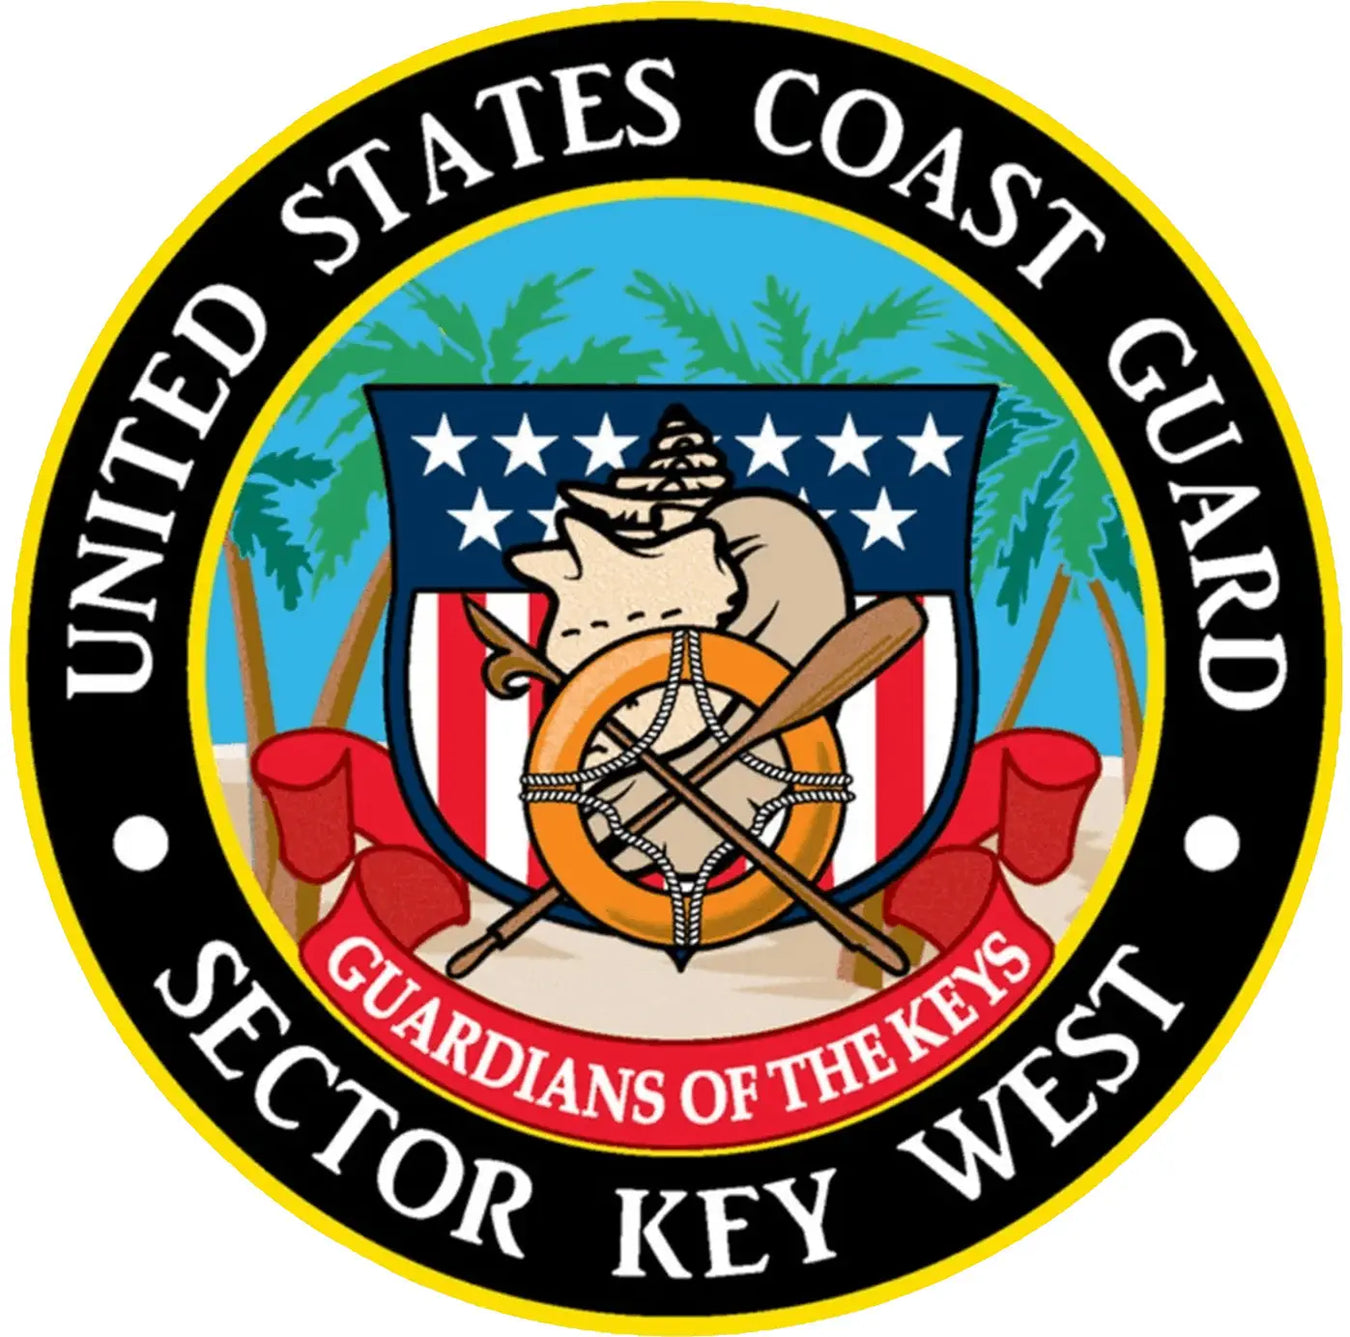 Sector Key West